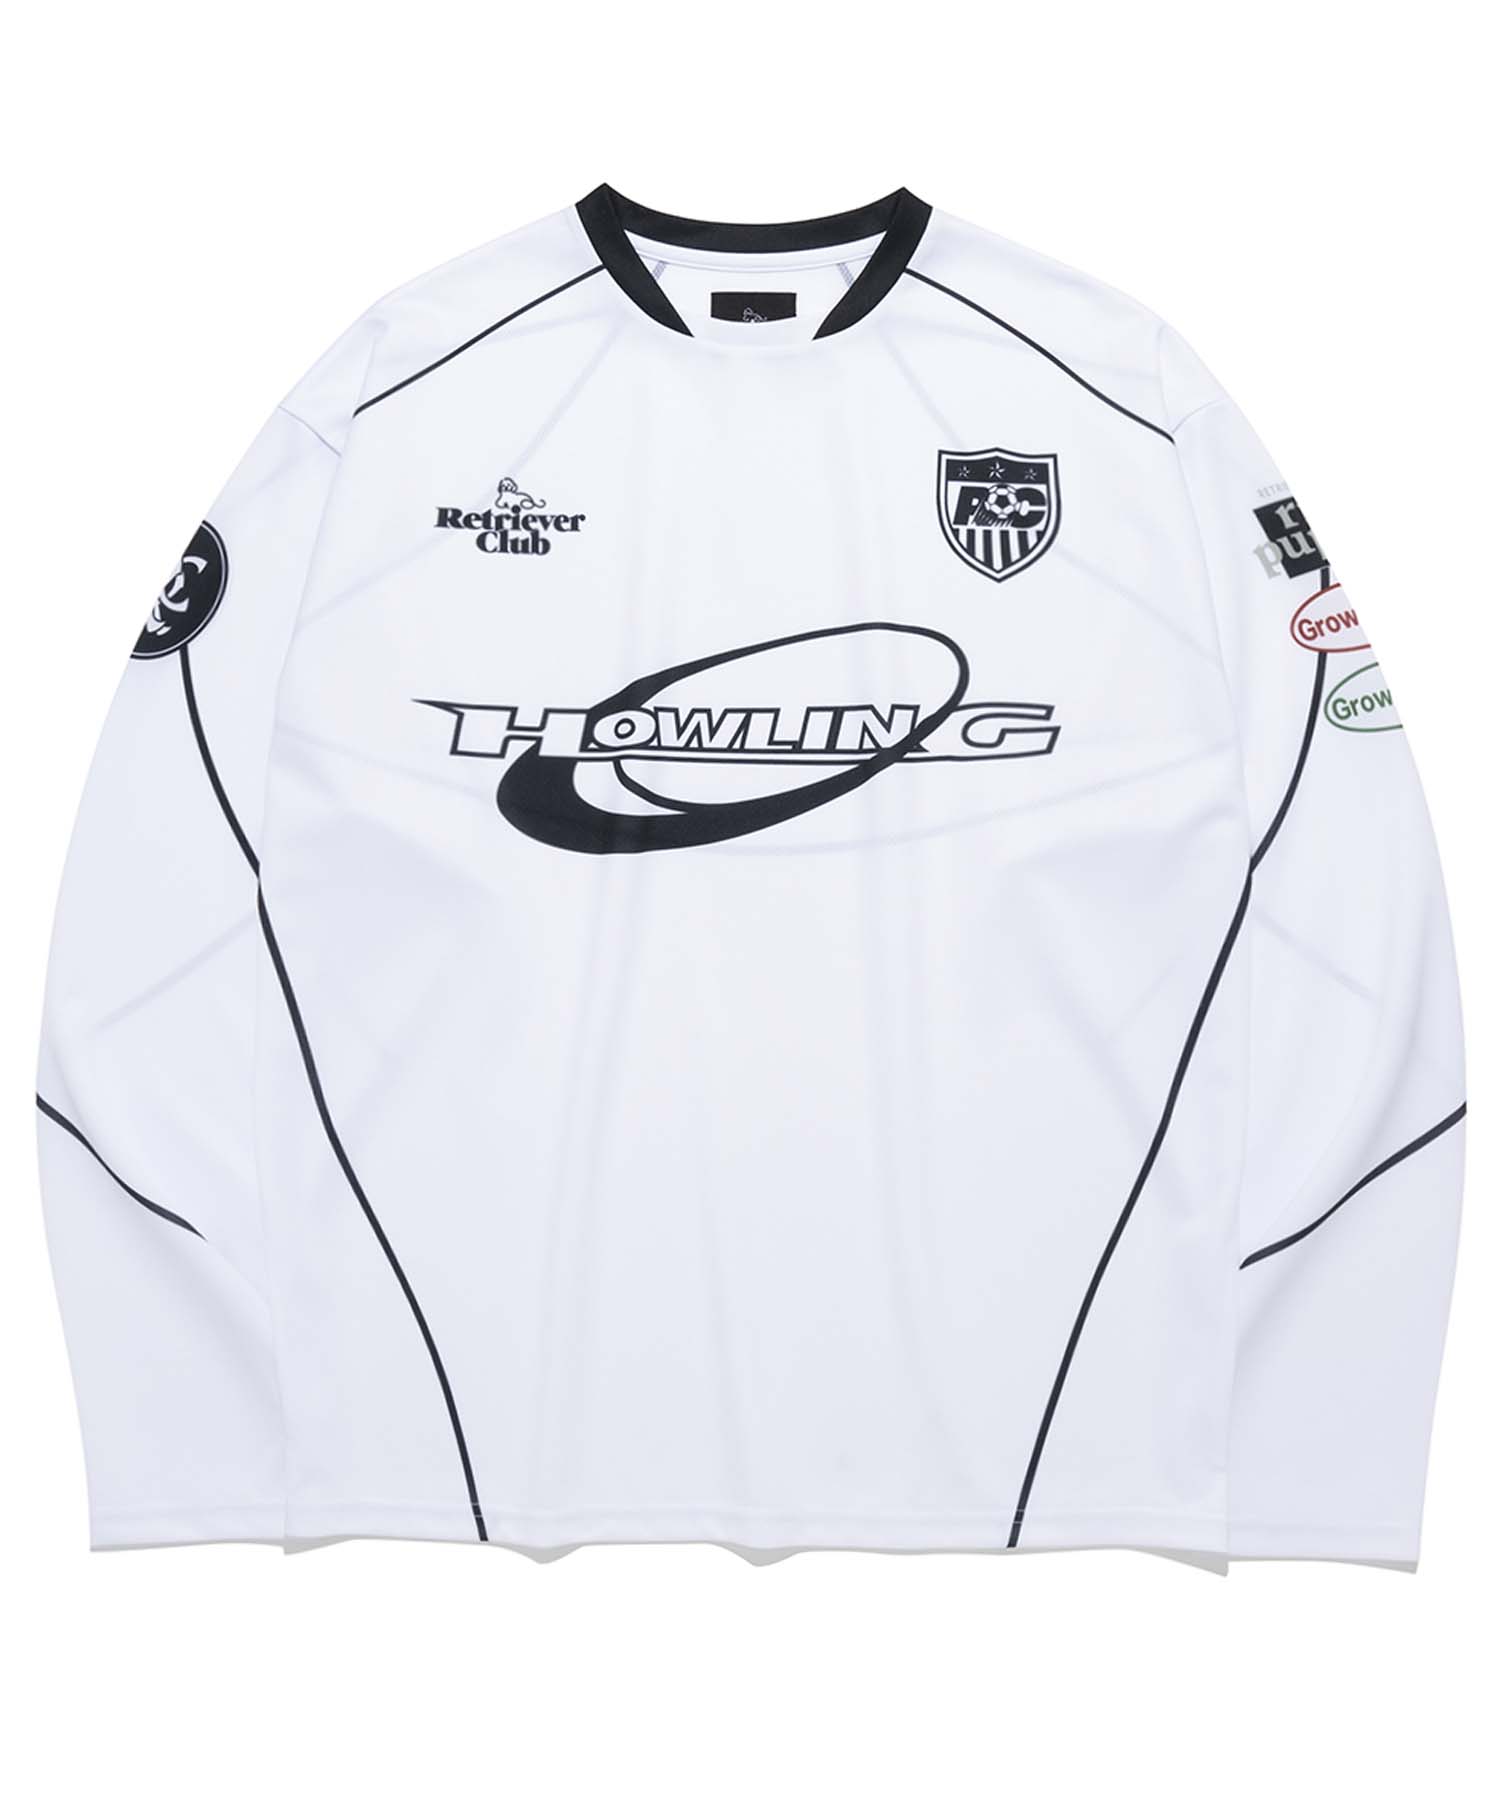 HOWLING JERSEY [WHITE]